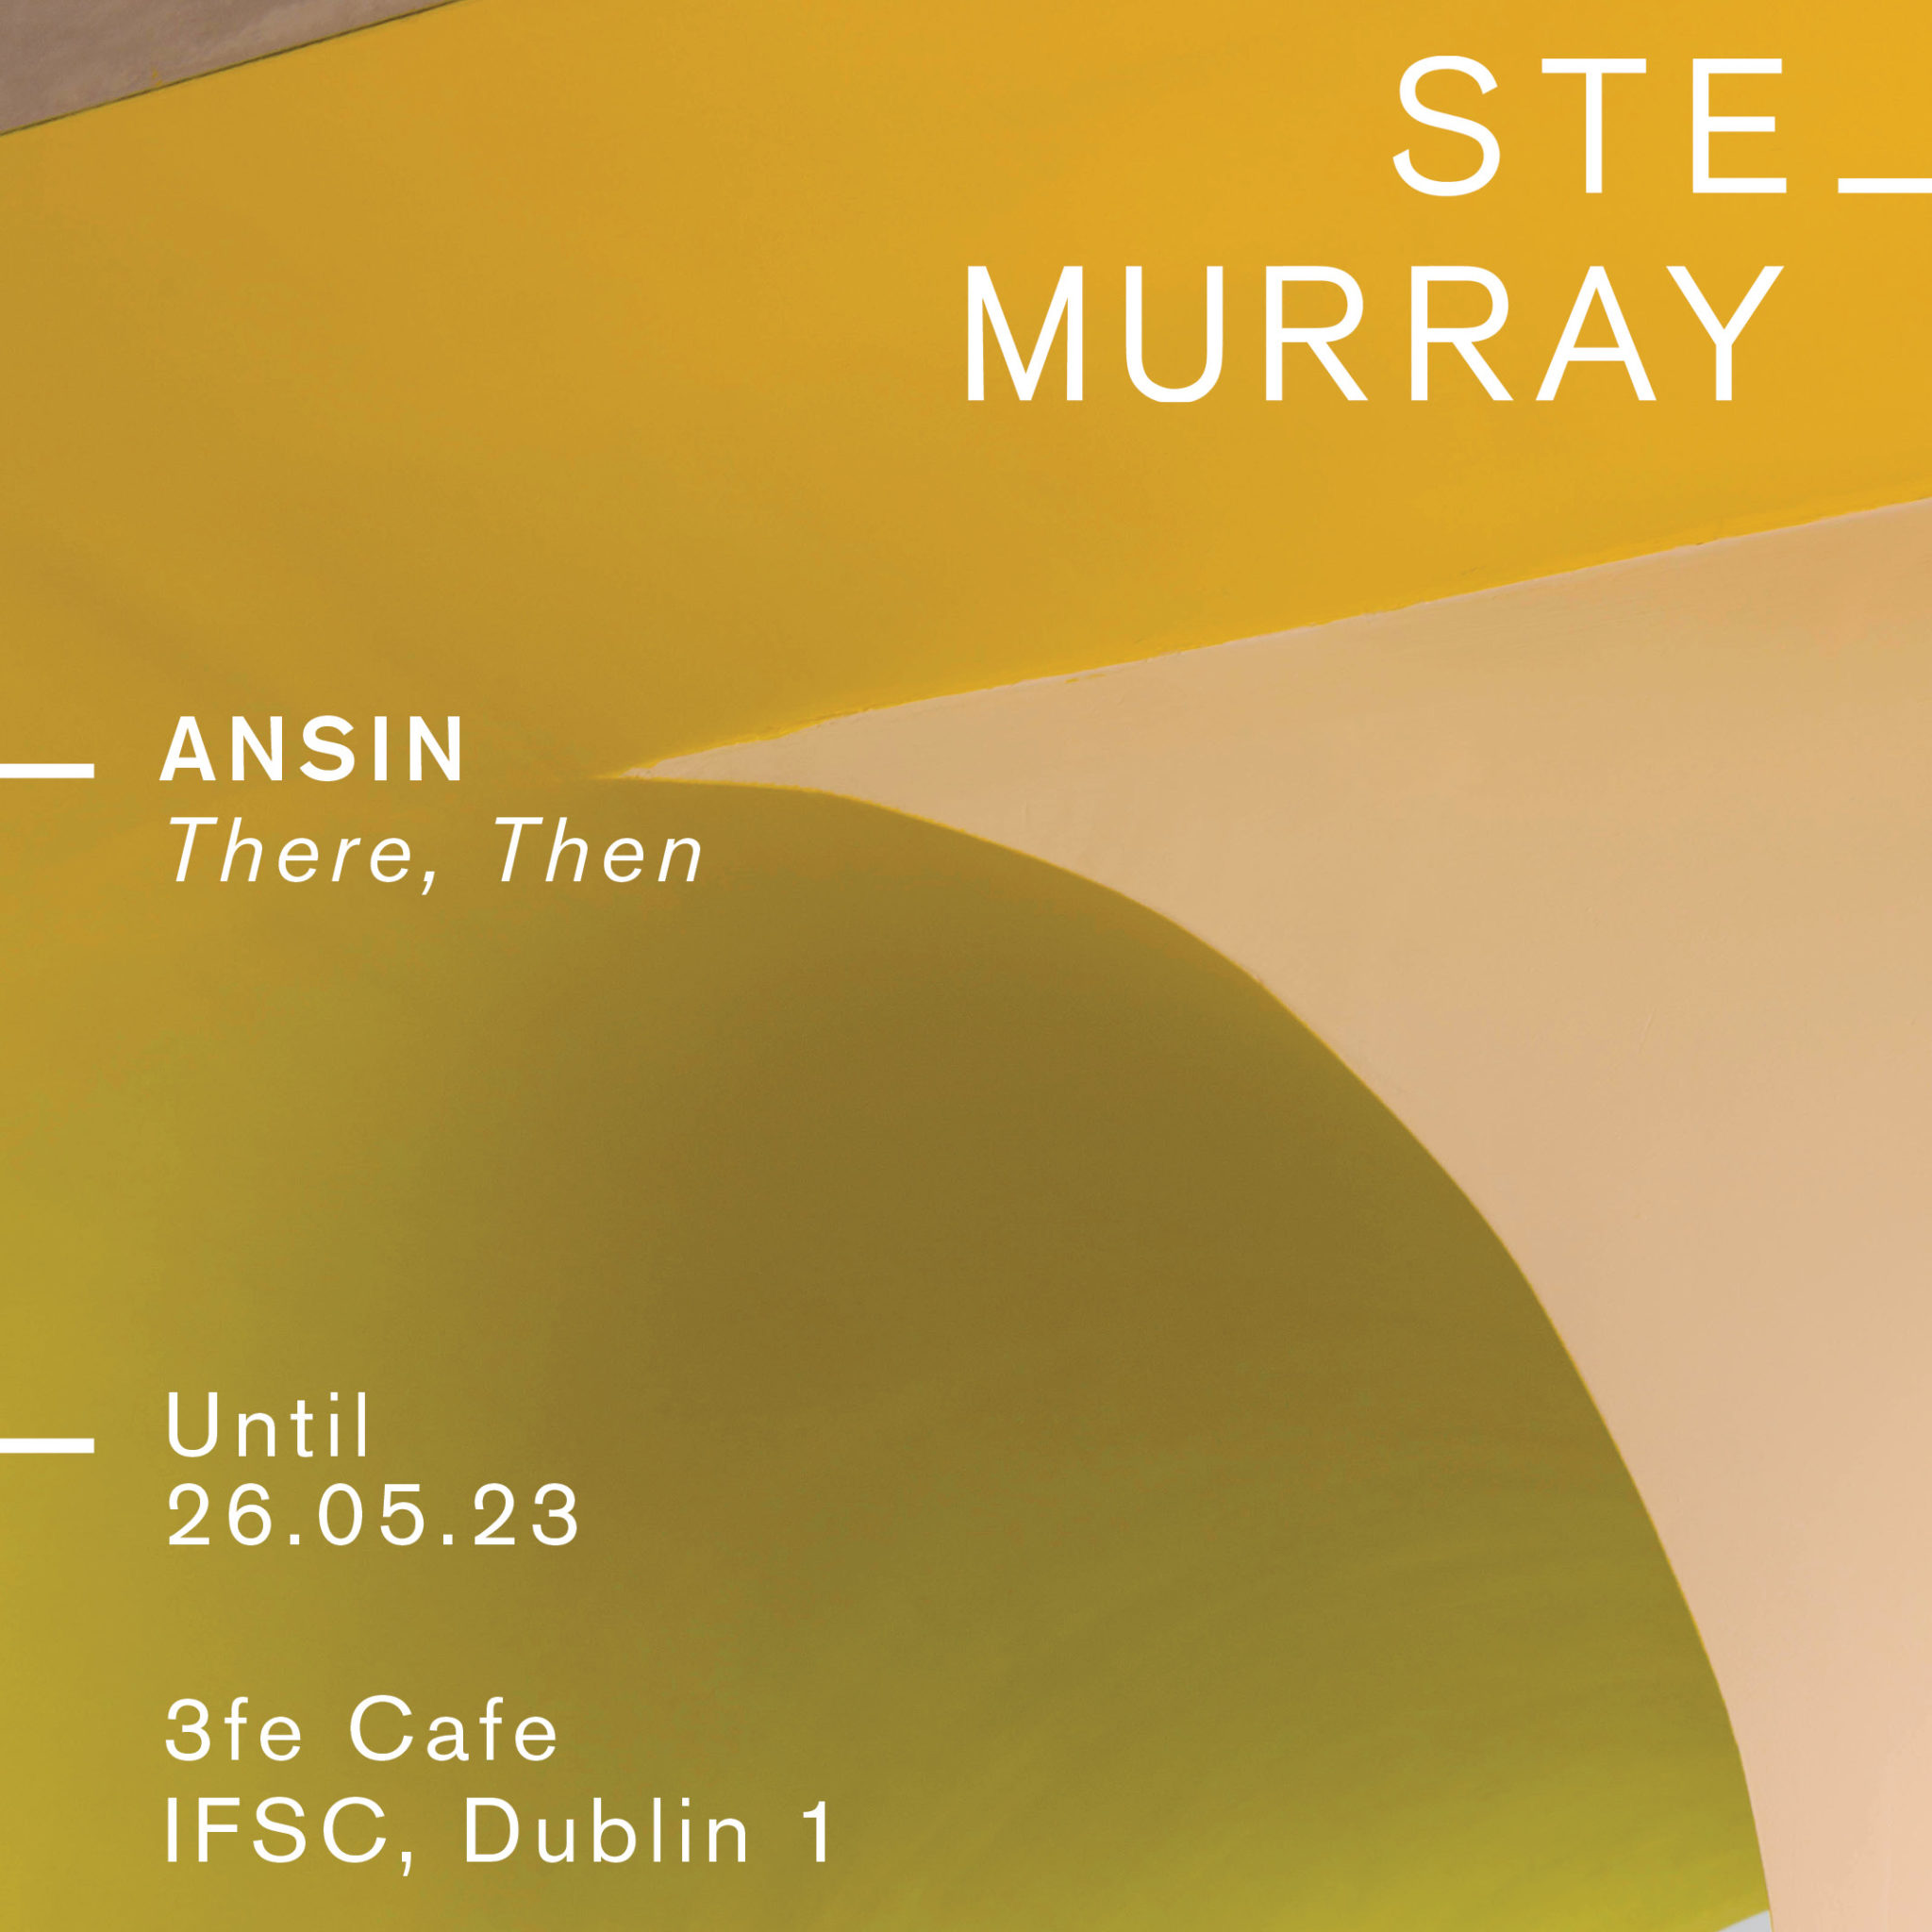 Ansin (There, Then) by Ste Murray